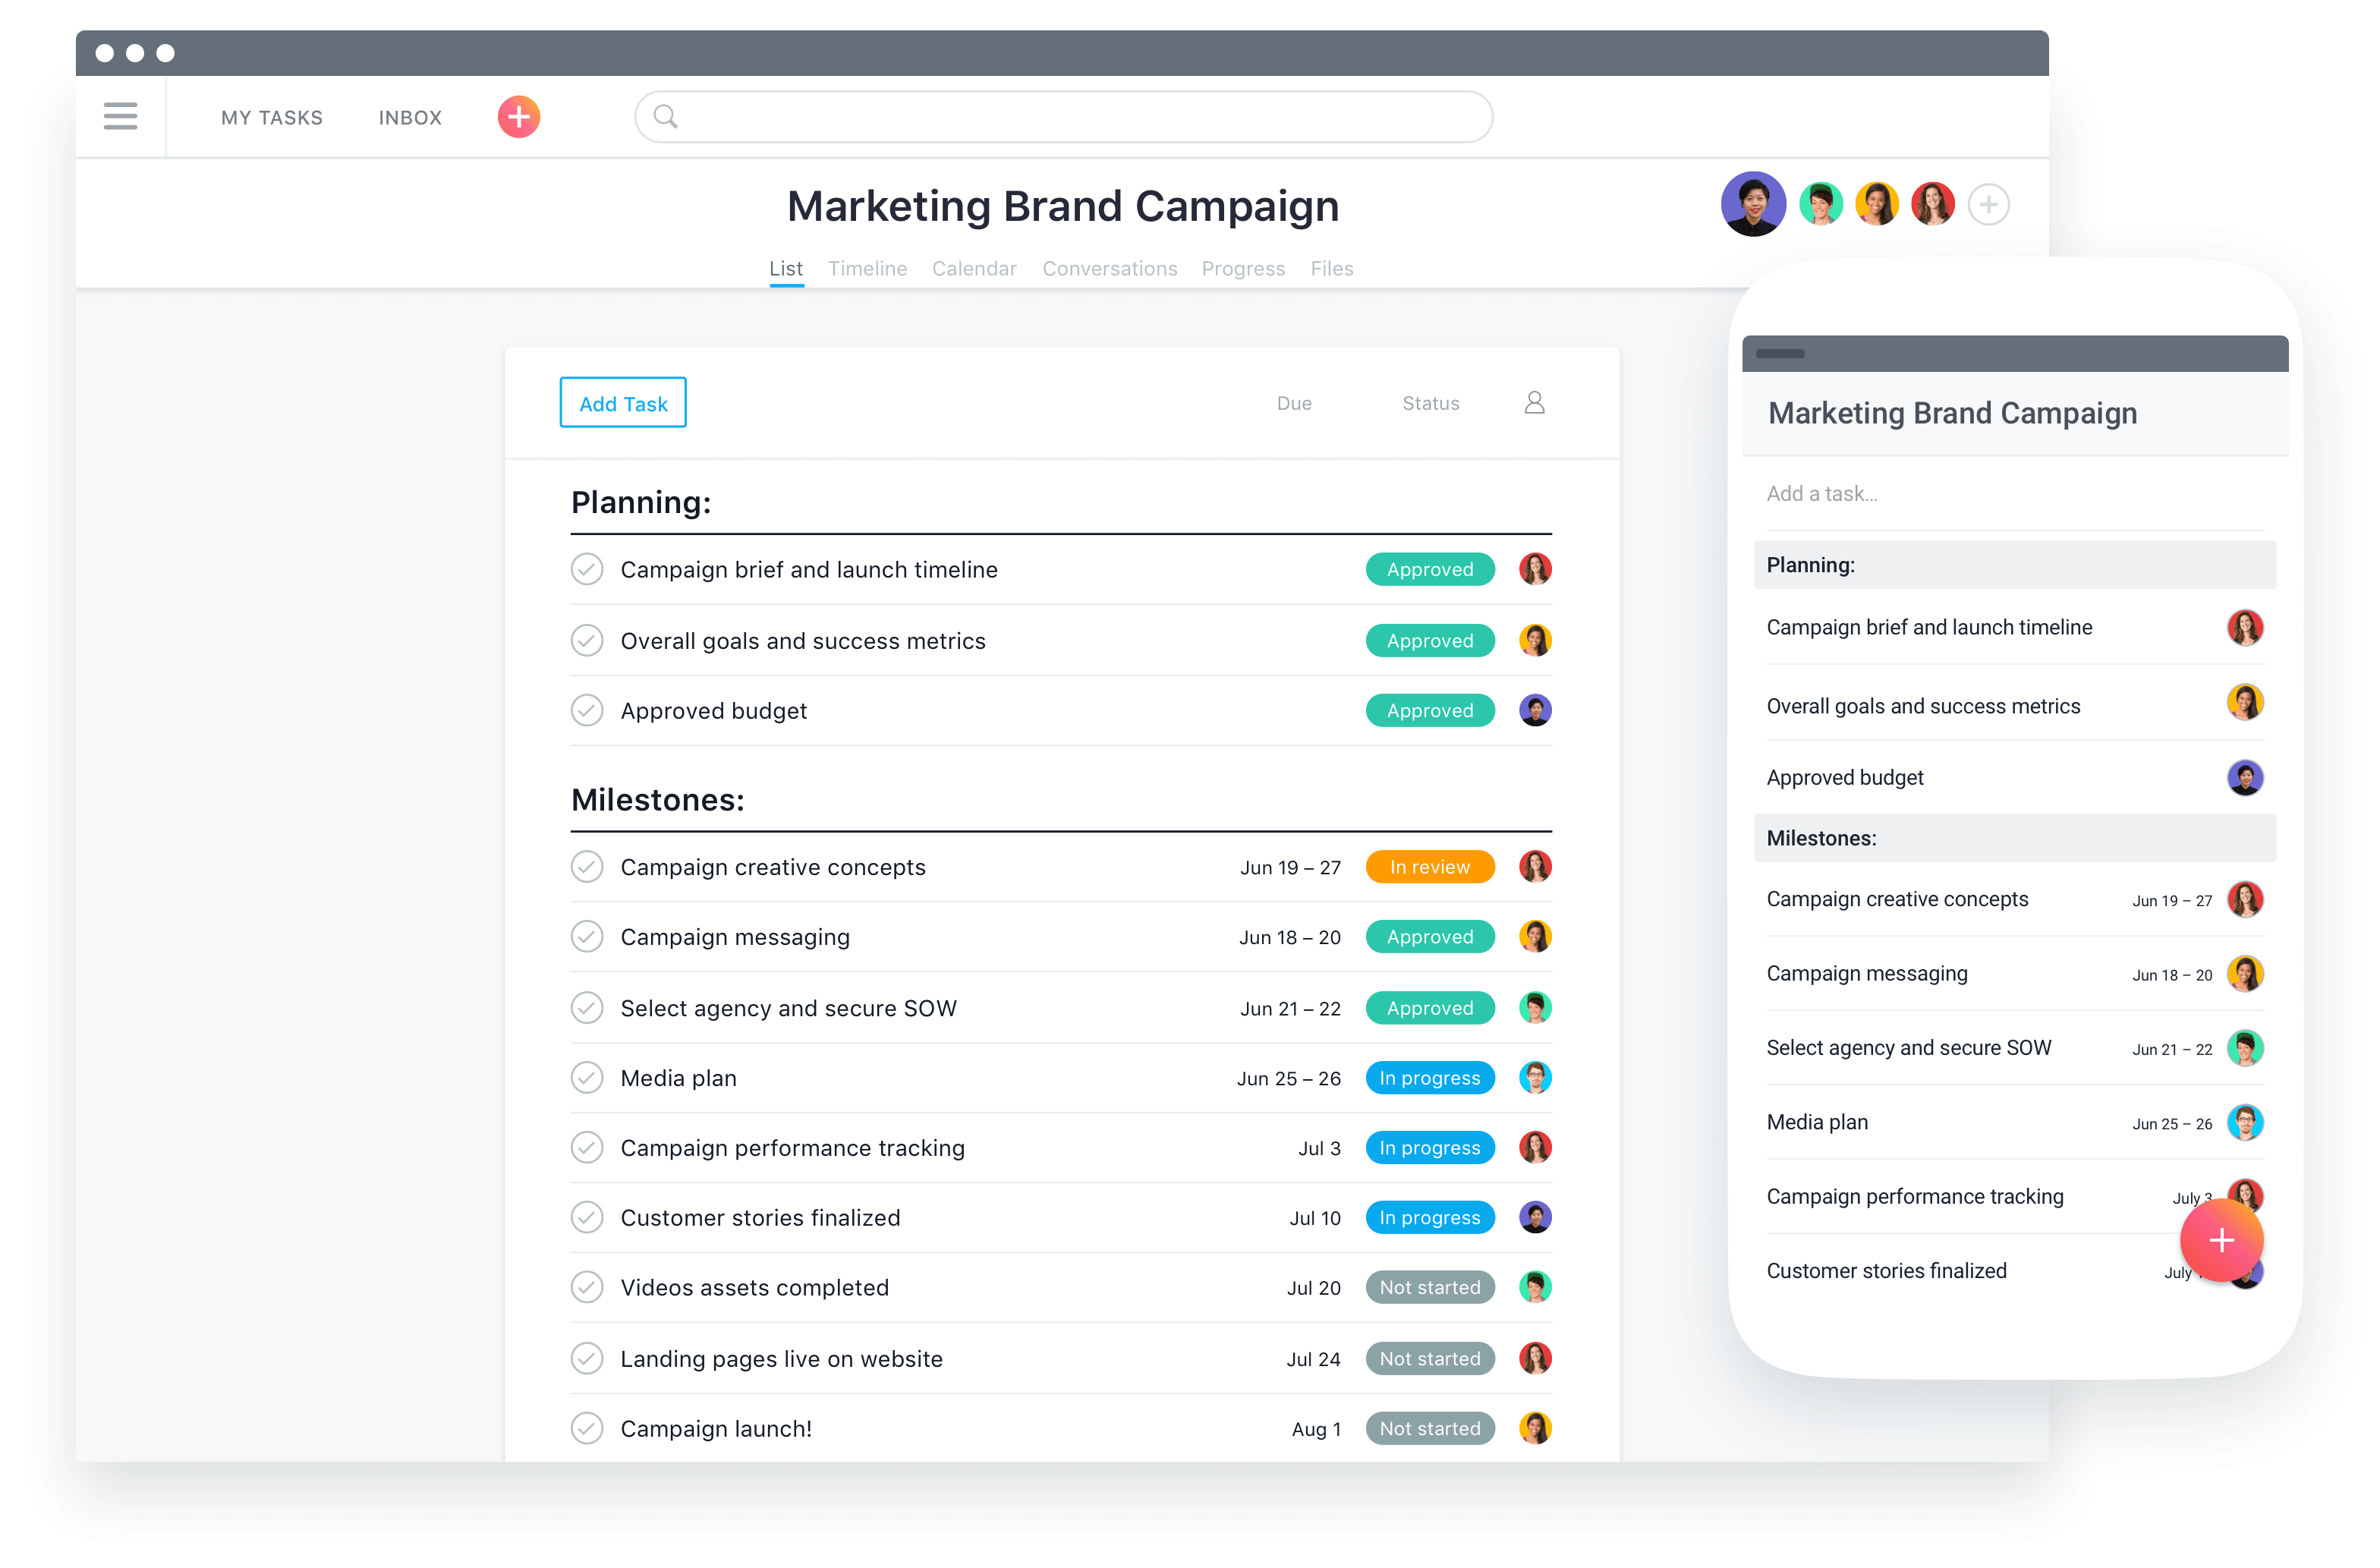 asana app used to track teams work, share tasks and manage projects